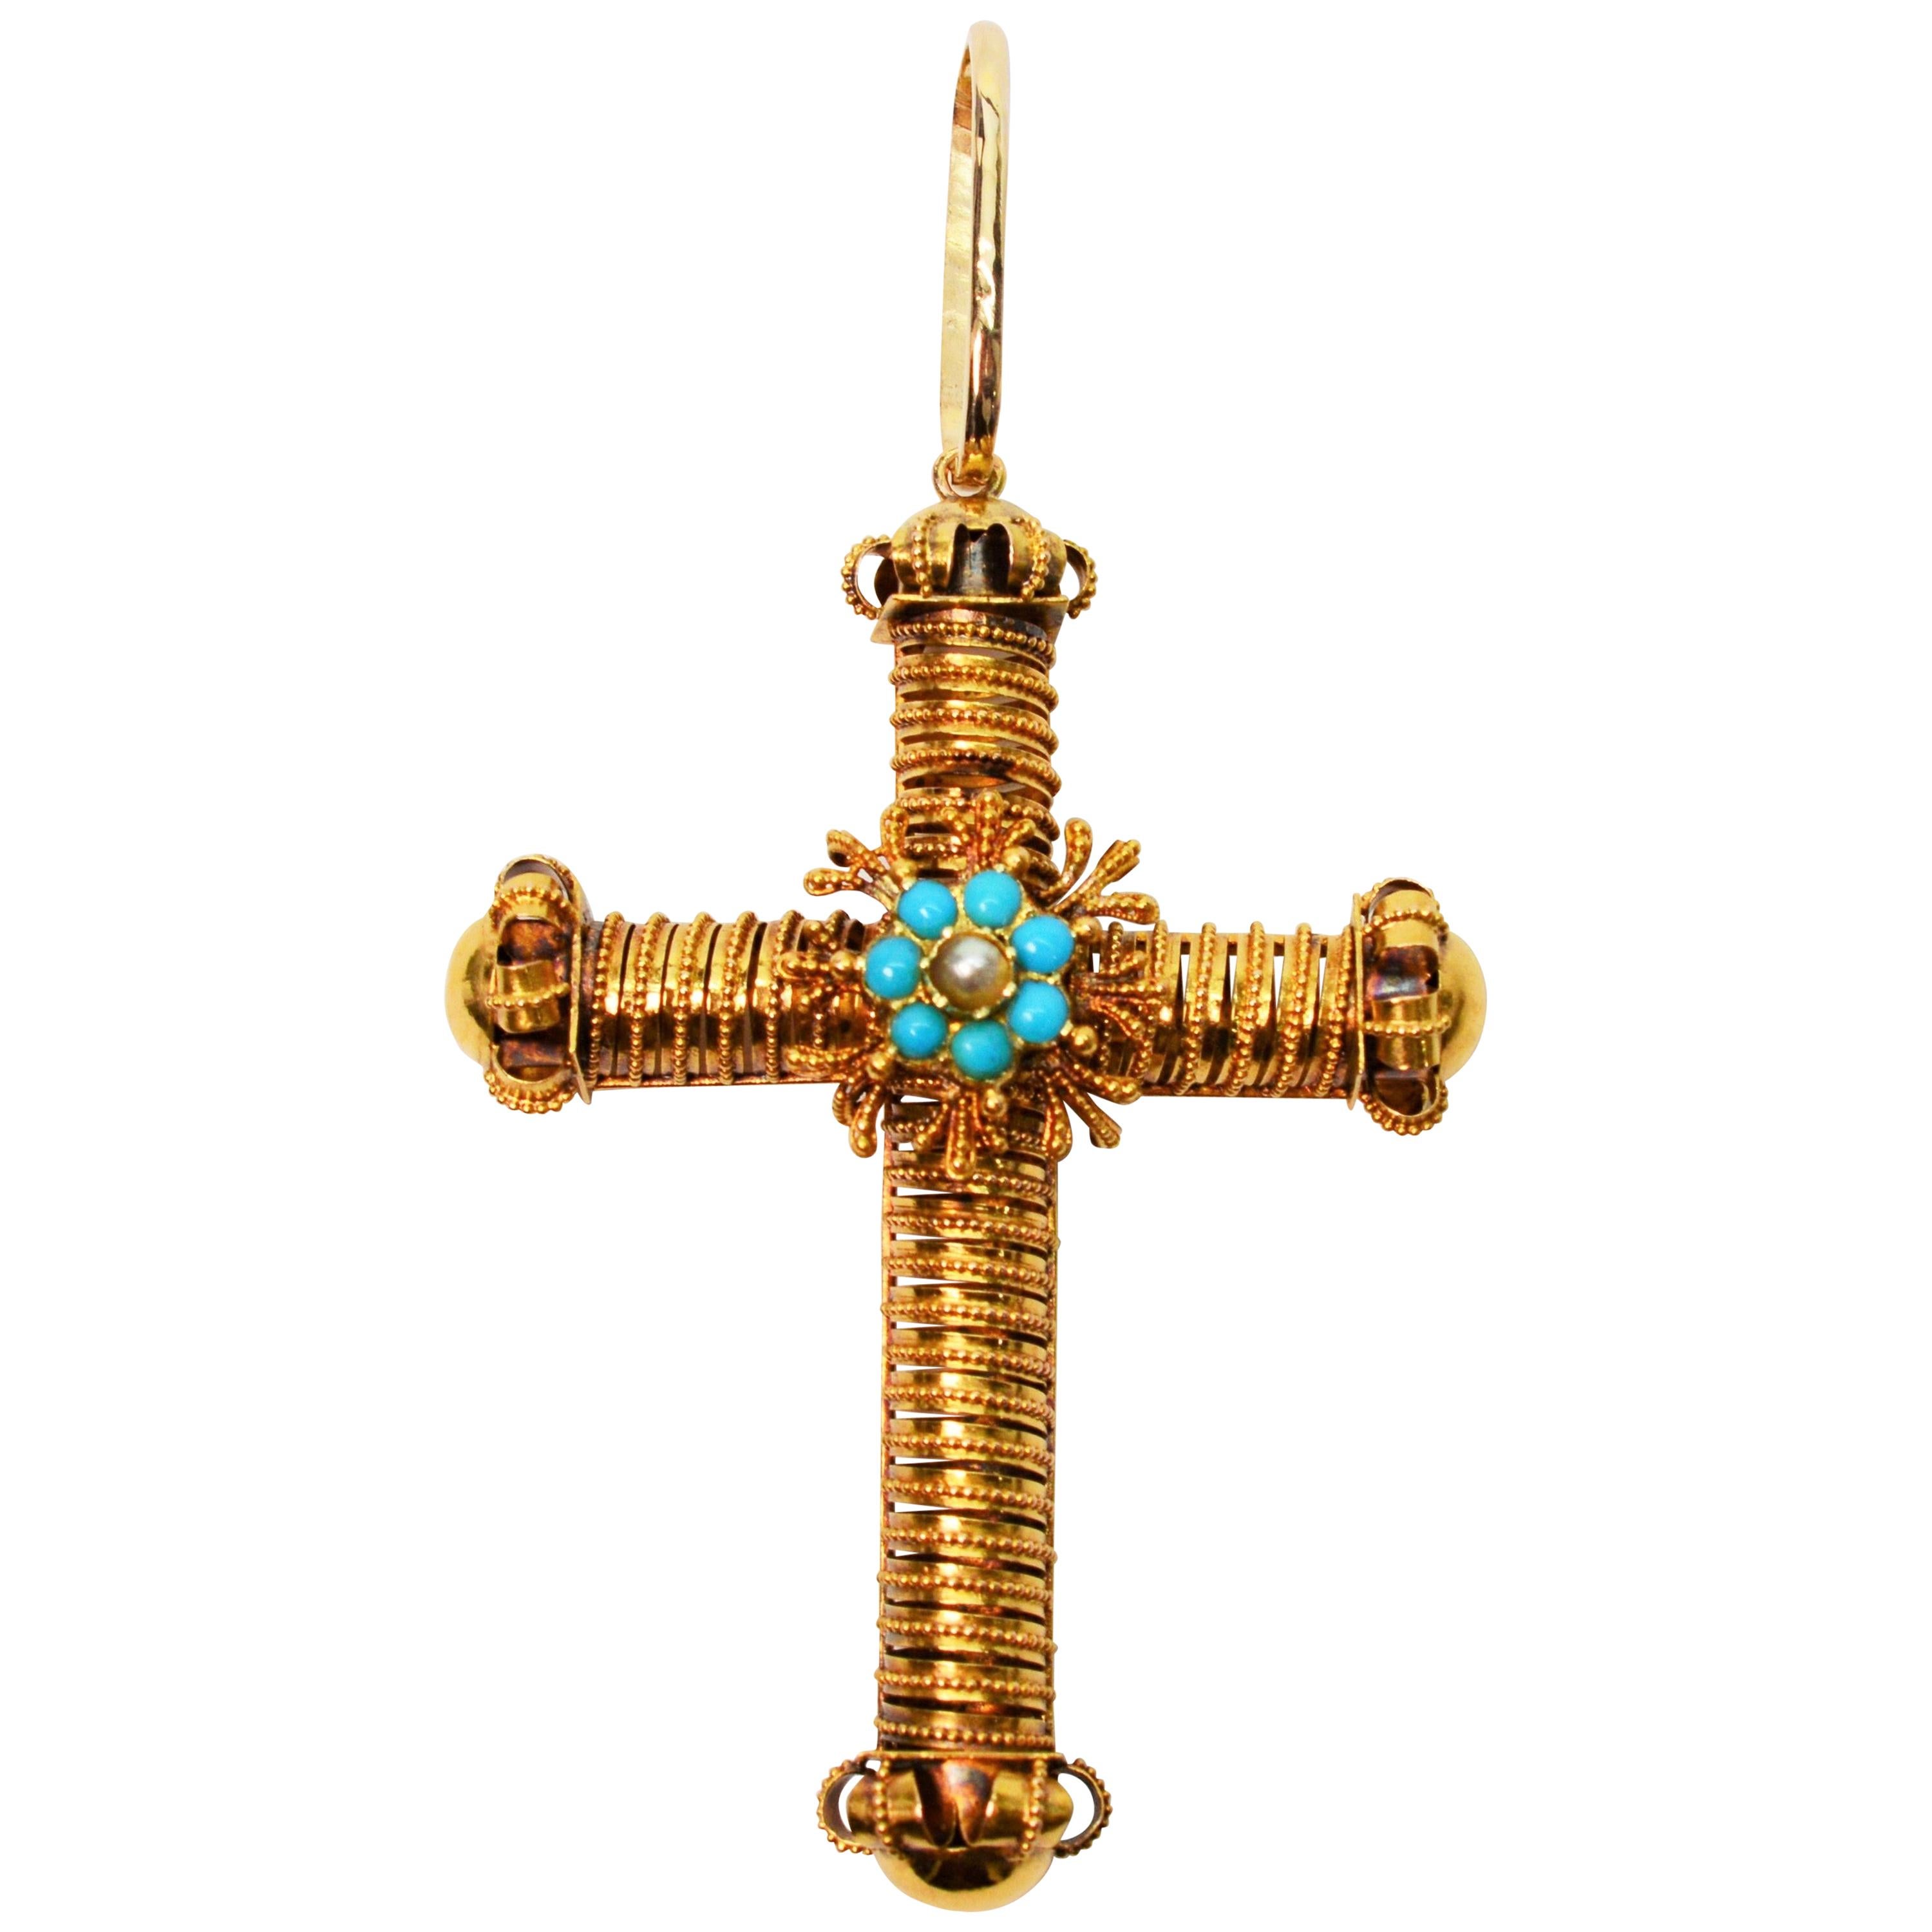 Ornate Yellow Gold Cross Pendant with Turquoise Pearl Accents